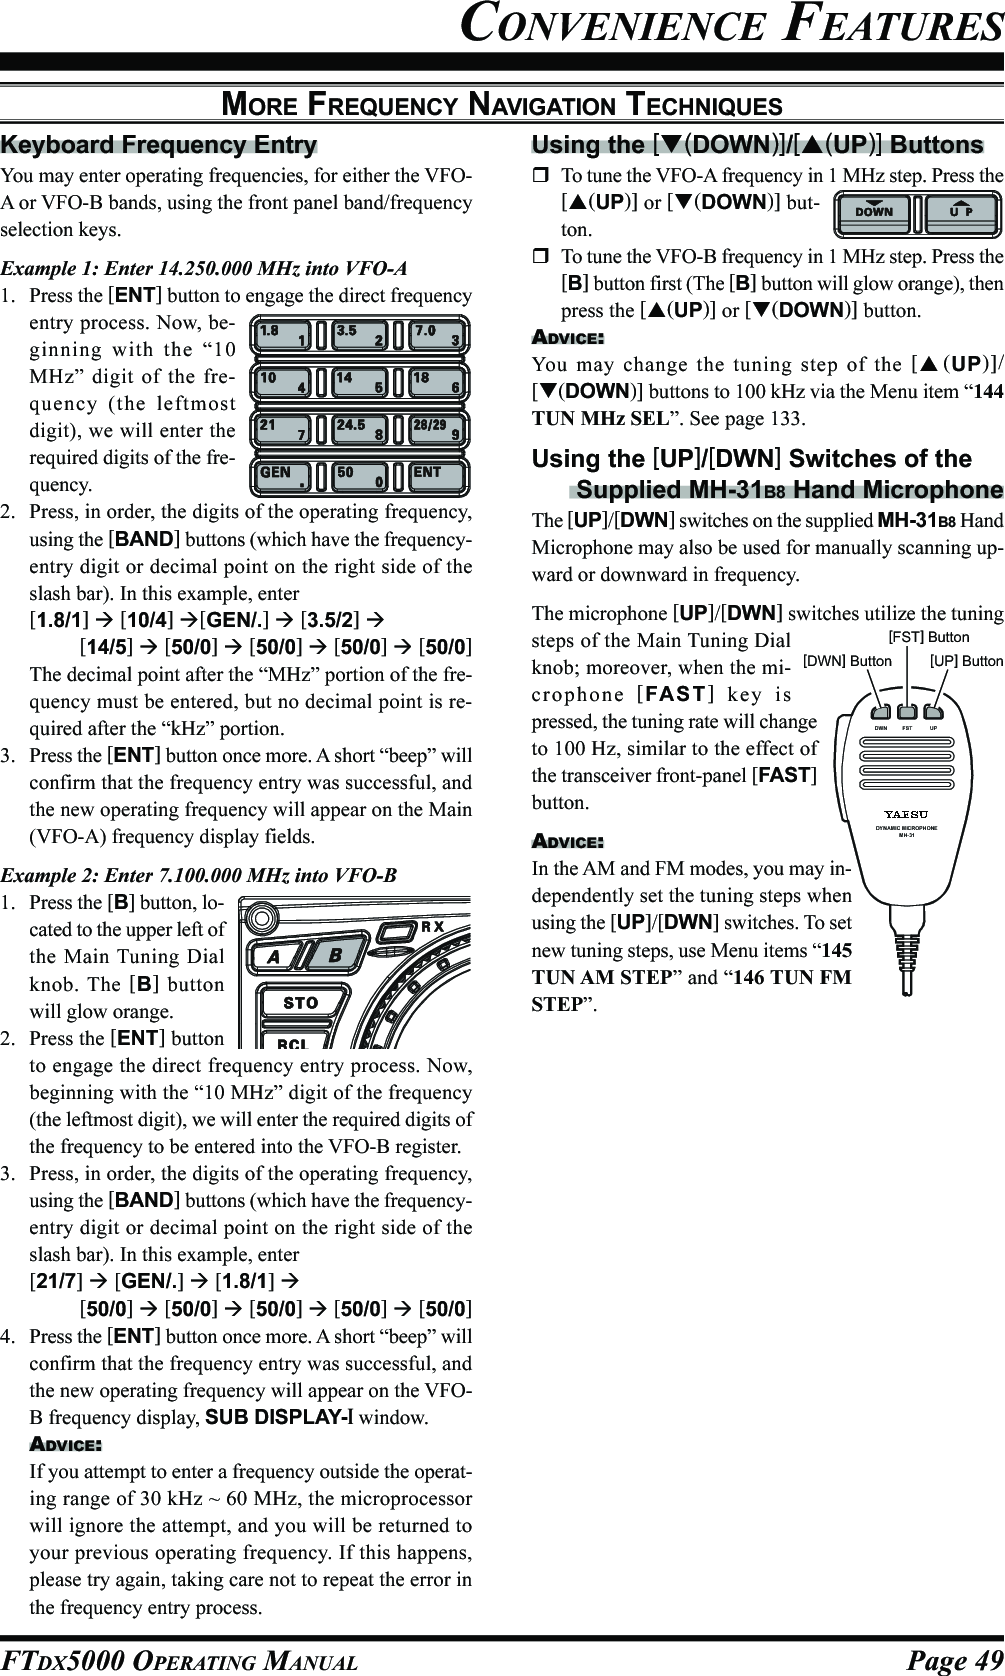 Page 49FTDX5000 OPERATING MANUALMORE FREQUENCY NAVIGATION TECHNIQUESKeyboard Frequency EntryYou may enter operating frequencies, for either the VFO-A or VFO-B bands, using the front panel band/frequencyselection keys.Example 1: Enter 14.250.000 MHz into VFO-A1. Press the [ENT] button to engage the direct frequencyentry process. Now, be-ginning with the “10MHz” digit of the fre-quency (the leftmostdigit), we will enter therequired digits of the fre-quency.2. Press, in order, the digits of the operating frequency,using the [BAND] buttons (which have the frequency-entry digit or decimal point on the right side of theslash bar). In this example, enter[1.8/1]  [10/4] [GEN/.]  [3.5/2] [14/5]  [50/0]  [50/0]  [50/0]  [50/0]The decimal point after the “MHz” portion of the fre-quency must be entered, but no decimal point is re-quired after the “kHz” portion.3. Press the [ENT] button once more. A short “beep” willconfirm that the frequency entry was successful, andthe new operating frequency will appear on the Main(VFO-A) frequency display fields.Example 2: Enter 7.100.000 MHz into VFO-B1. Press the [B] button, lo-cated to the upper left ofthe Main Tuning Dialknob. The [B] buttonwill glow orange.2. Press the [ENT] buttonto engage the direct frequency entry process. Now,beginning with the “10 MHz” digit of the frequency(the leftmost digit), we will enter the required digits ofthe frequency to be entered into the VFO-B register.3. Press, in order, the digits of the operating frequency,using the [BAND] buttons (which have the frequency-entry digit or decimal point on the right side of theslash bar). In this example, enter[21/7]  [GEN/.]  [1.8/1] [50/0]  [50/0]  [50/0]  [50/0]  [50/0]4. Press the [ENT] button once more. A short “beep” willconfirm that the frequency entry was successful, andthe new operating frequency will appear on the VFO-B frequency display, SUB DISPLAY-I window.ADVICE:If you attempt to enter a frequency outside the operat-ing range of 30 kHz ~ 60 MHz, the microprocessorwill ignore the attempt, and you will be returned toyour previous operating frequency. If this happens,please try again, taking care not to repeat the error inthe frequency entry process.Using the [(DOWN)]/[(UP)] ButtonsTo tune the VFO-A frequency in 1 MHz step. Press the[(UP)] or [(DOWN)] but-ton.To tune the VFO-B frequency in 1 MHz step. Press the[B] button first (The [B] button will glow orange), thenpress the [(UP)] or [(DOWN)] button.ADVICE:You may change the tuning step of the [(UP)]/[(DOWN)] buttons to 100 kHz via the Menu item “144TUN MHz SEL”. See page 133.Using the [UP]/[DWN] Switches of the Supplied MH-31B8 Hand MicrophoneThe [UP]/[DWN] switches on the supplied MH-31B8 HandMicrophone may also be used for manually scanning up-ward or downward in frequency.The microphone [UP]/[DWN] switches utilize the tuningsteps of the Main Tuning Dialknob; moreover, when the mi-crophone  [FAST] key ispressed, the tuning rate will changeto 100 Hz, similar to the effect ofthe transceiver front-panel [FAST]button.ADVICE:In the AM and FM modes, you may in-dependently set the tuning steps whenusing the [UP]/[DWN] switches. To setnew tuning steps, use Menu items “145TUN AM STEP” and “146 TUN FMSTEP”.CONVENIENCE FEATURESDYNAMIC MICROPHONEMH-31DWN F ST UP[DWN] Button[FST] Button[UP] Button